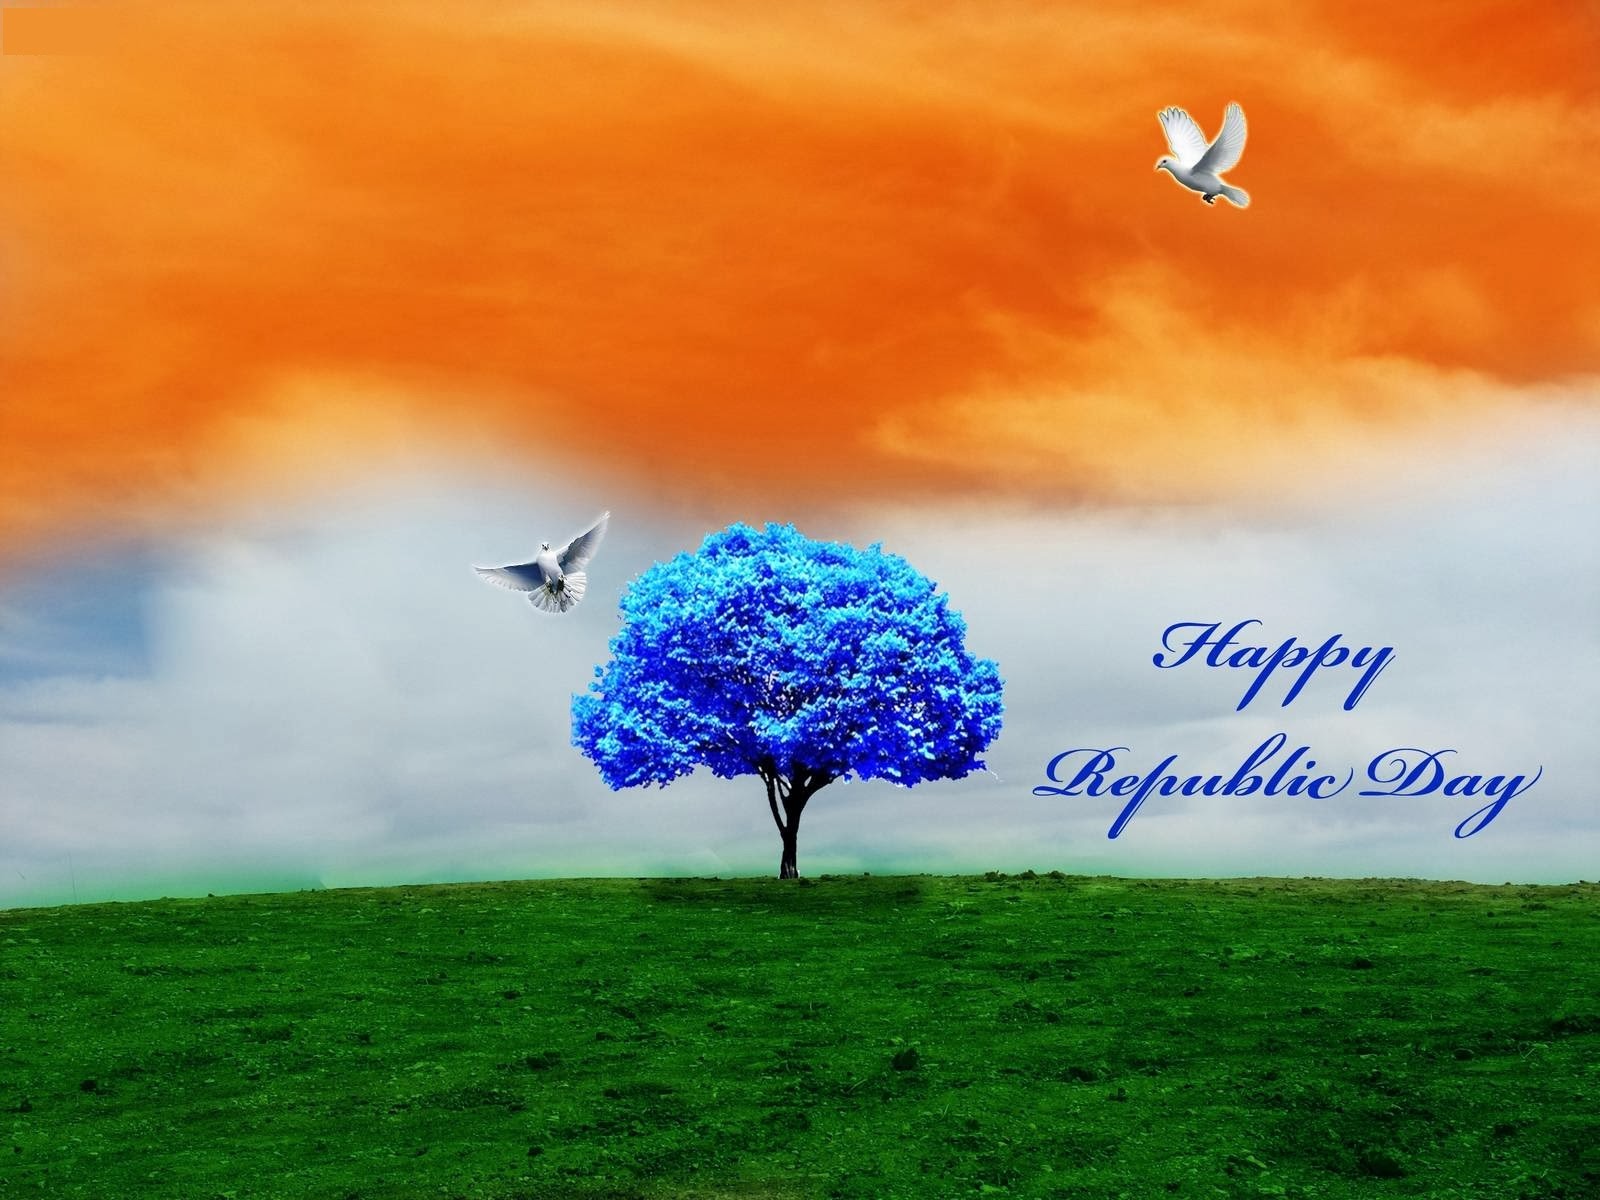 Republic Day 2020 Hd Images For WhatsApp